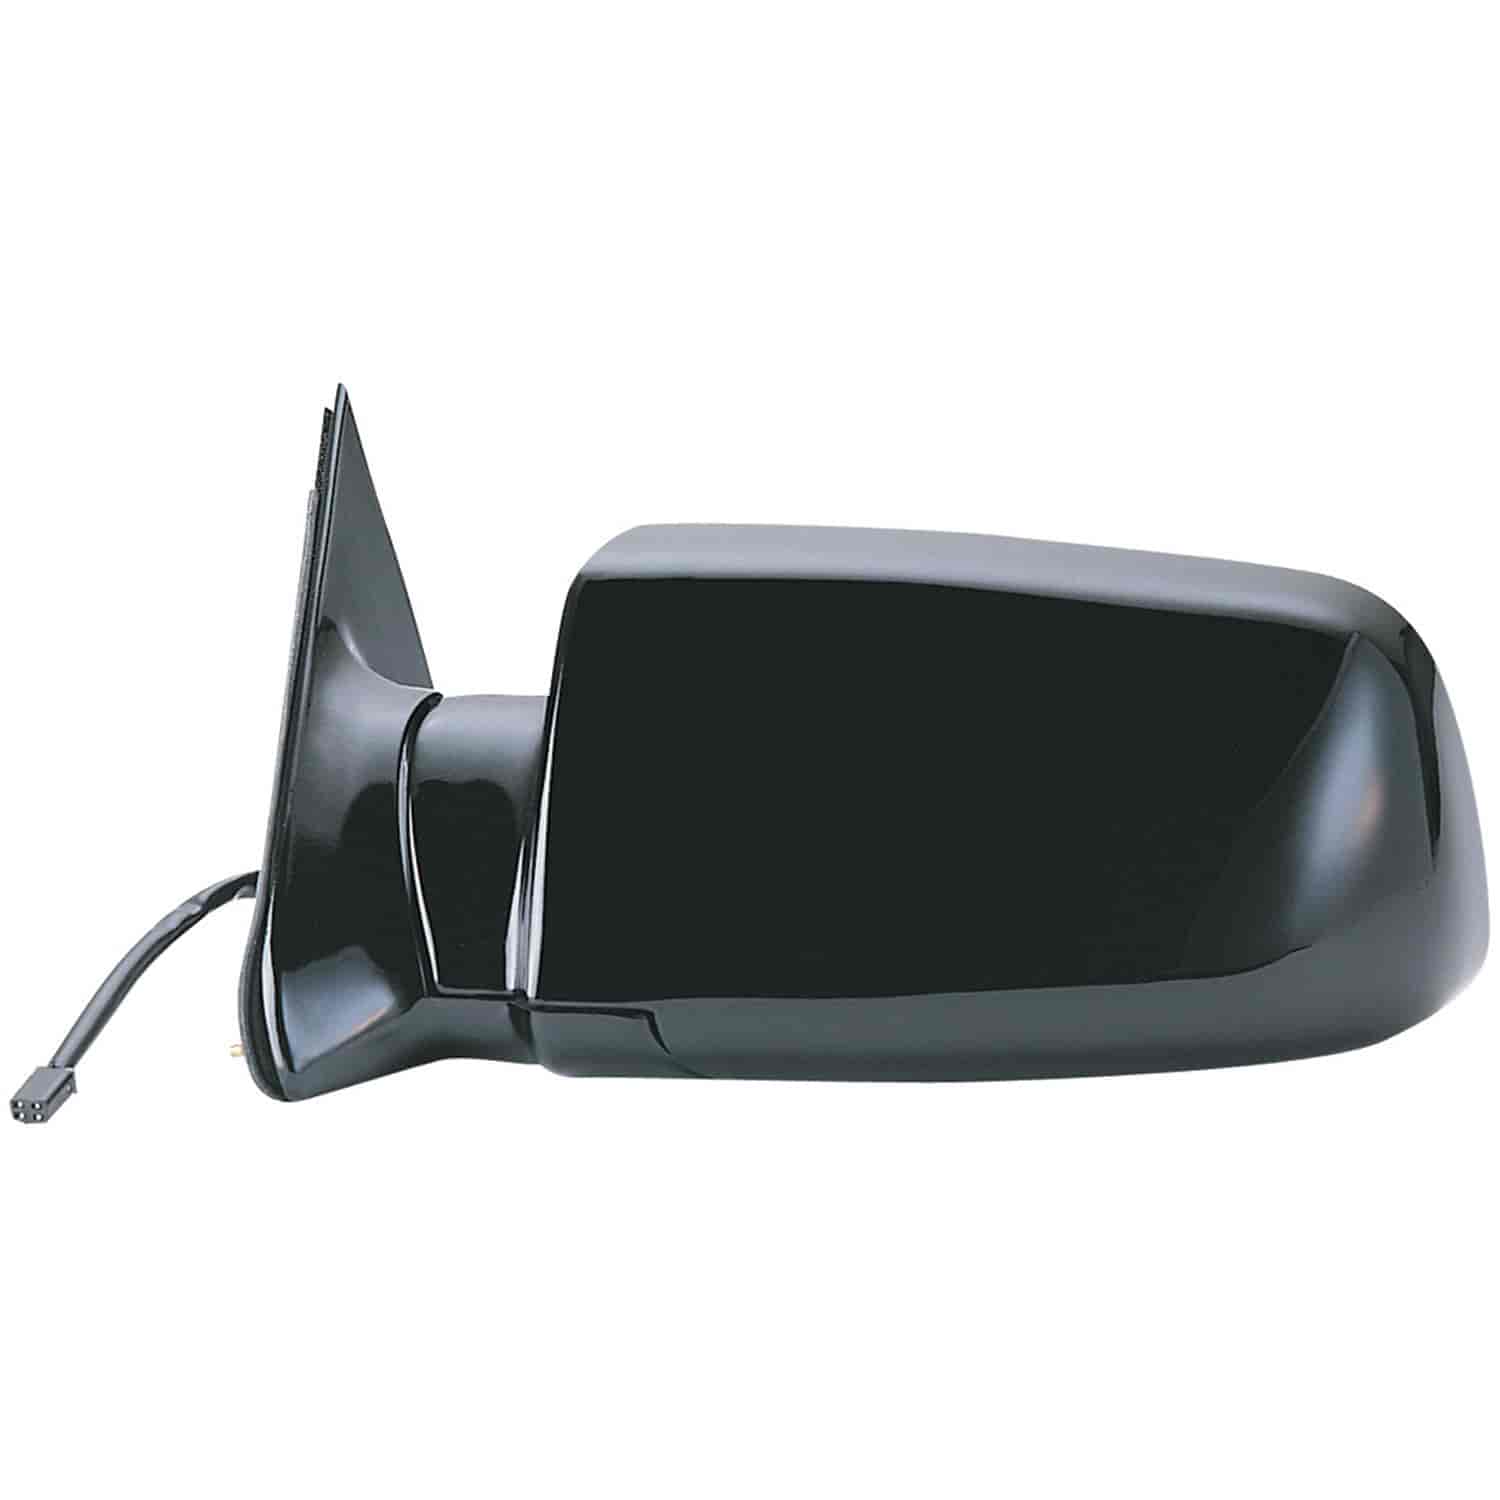 OEM Style Replacement mirror for 92-94 Blazer 88-02 GM Full Size Pick-Up 92-99 95-00 Tahoe 92-00 Yuk